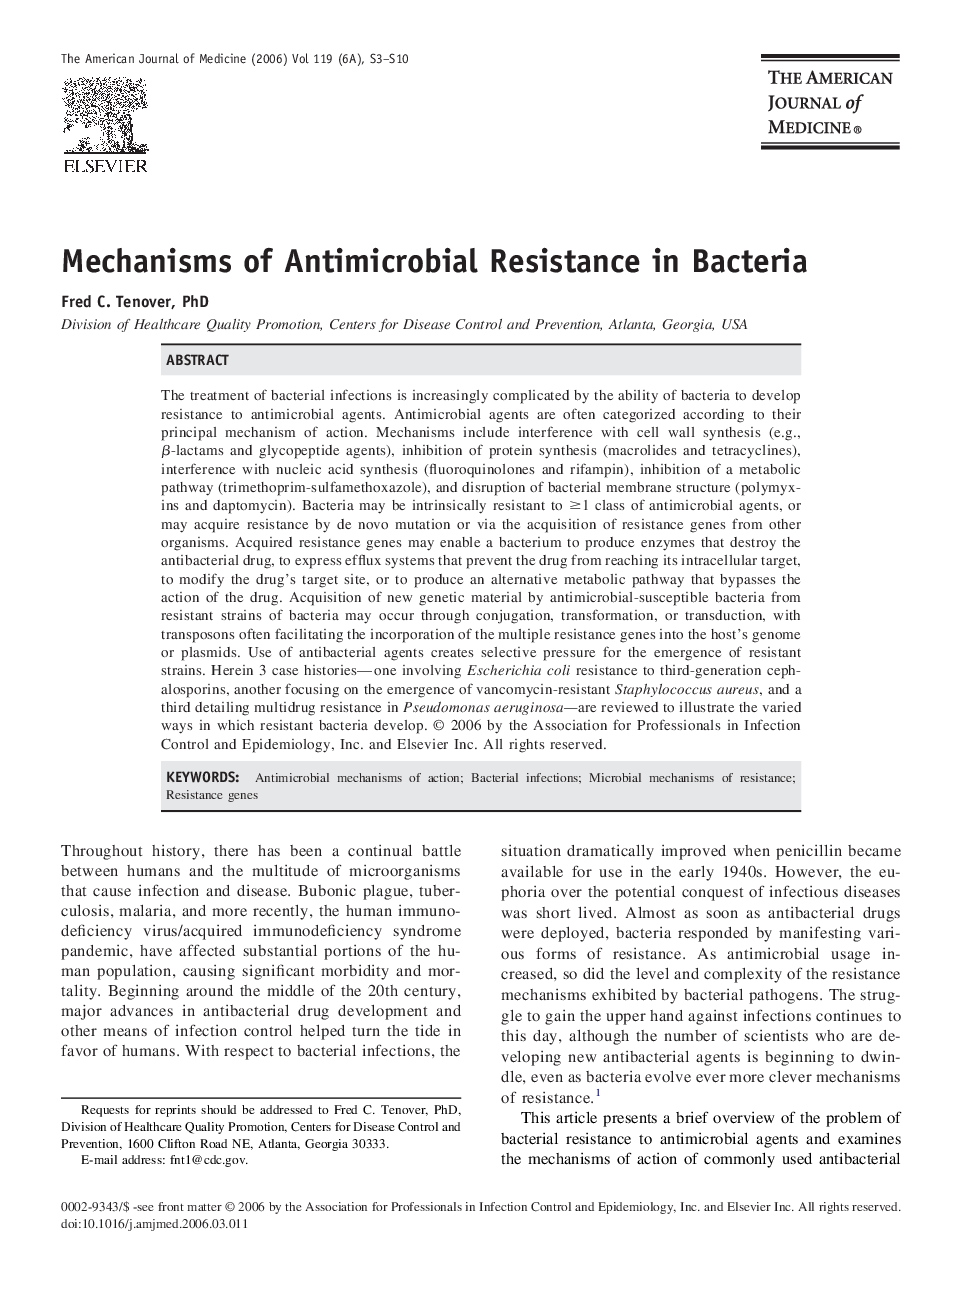 Mechanisms of Antimicrobial Resistance in Bacteria